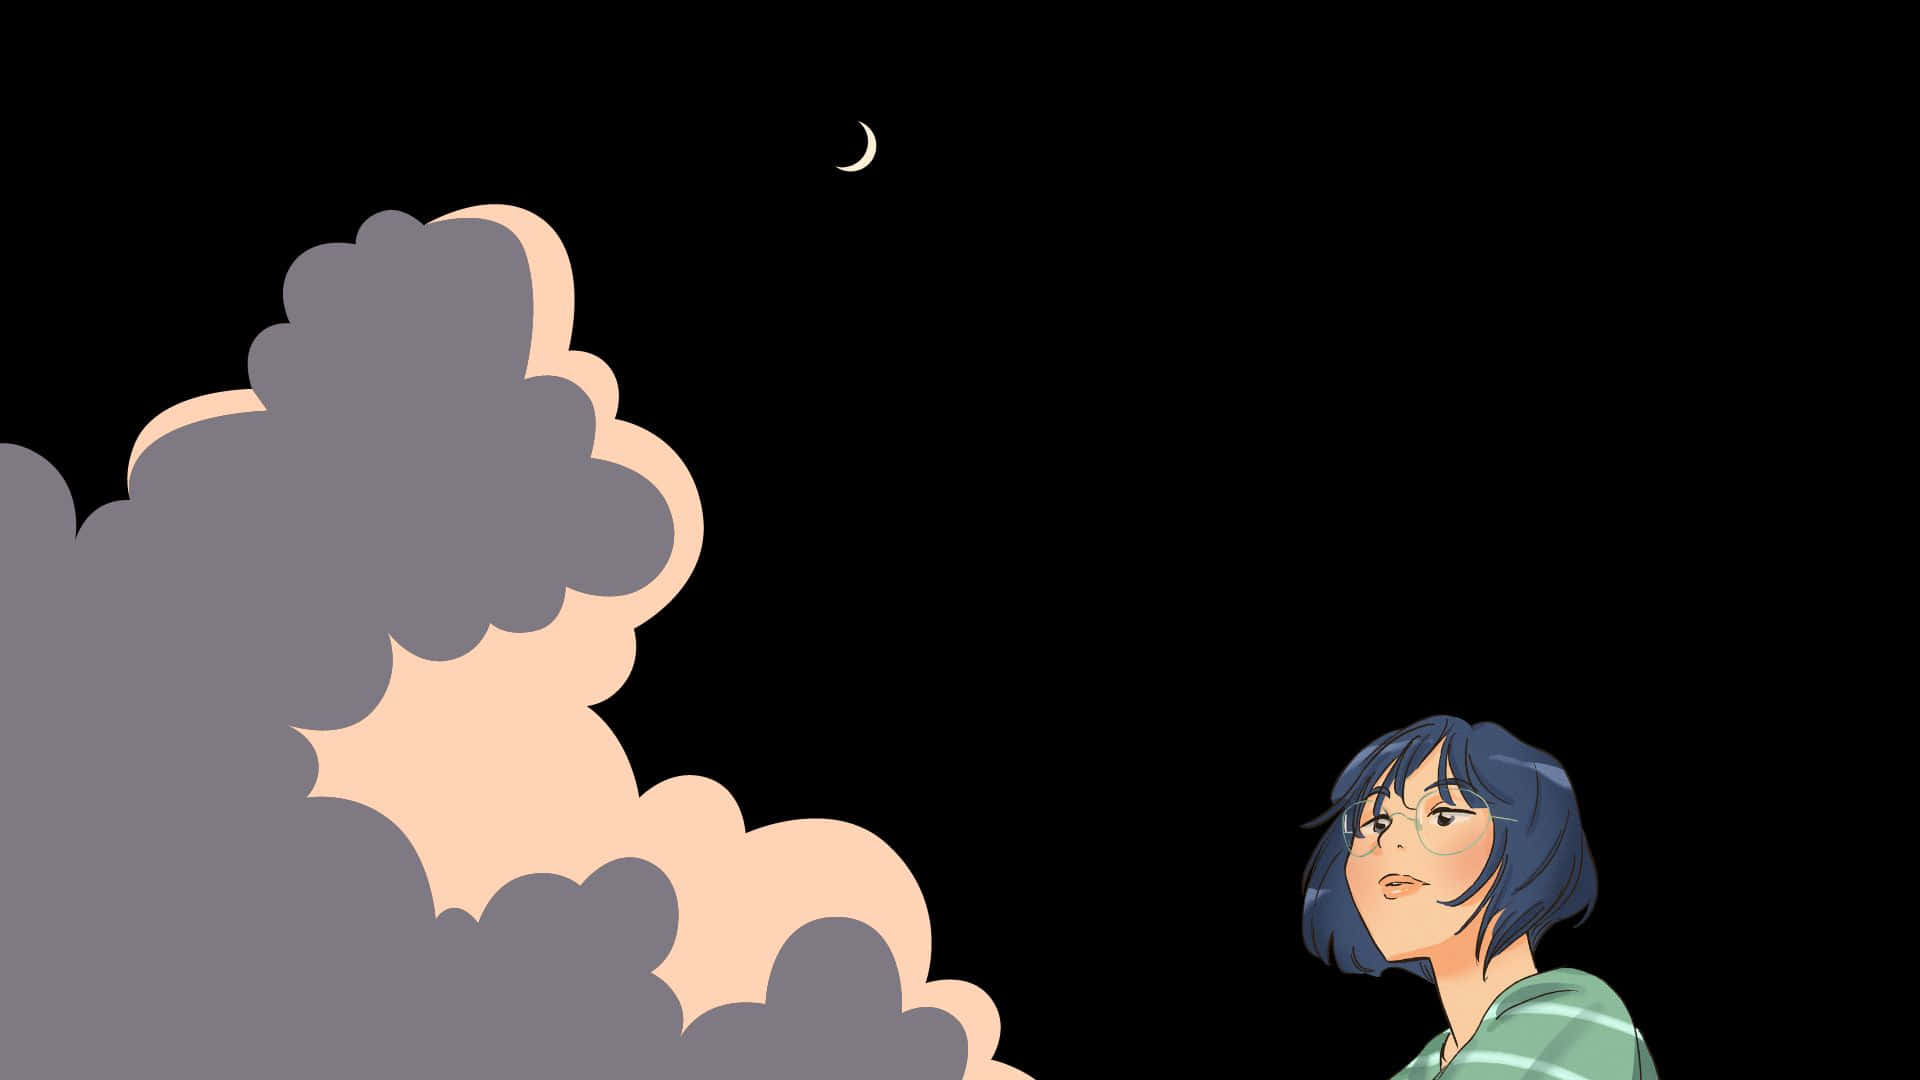 Clouds And Cartoon Girl Design Black Background